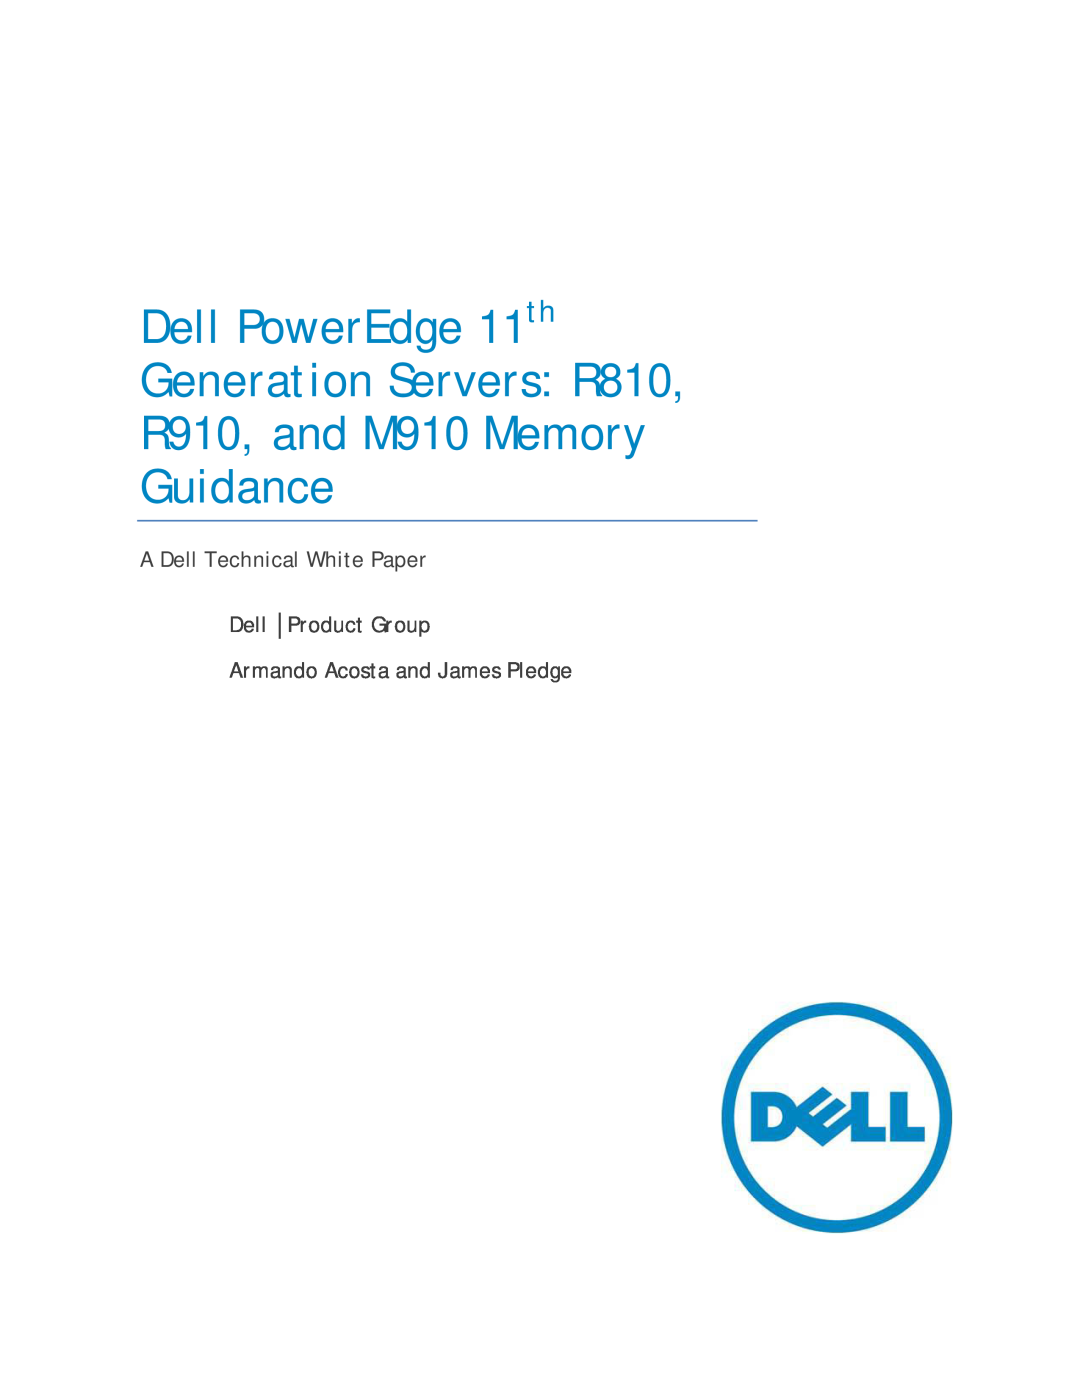 Dell manual Getting Started With Your System, Dell PowerEdge R910 Systems, Procedimientos iniciales con el sistema 